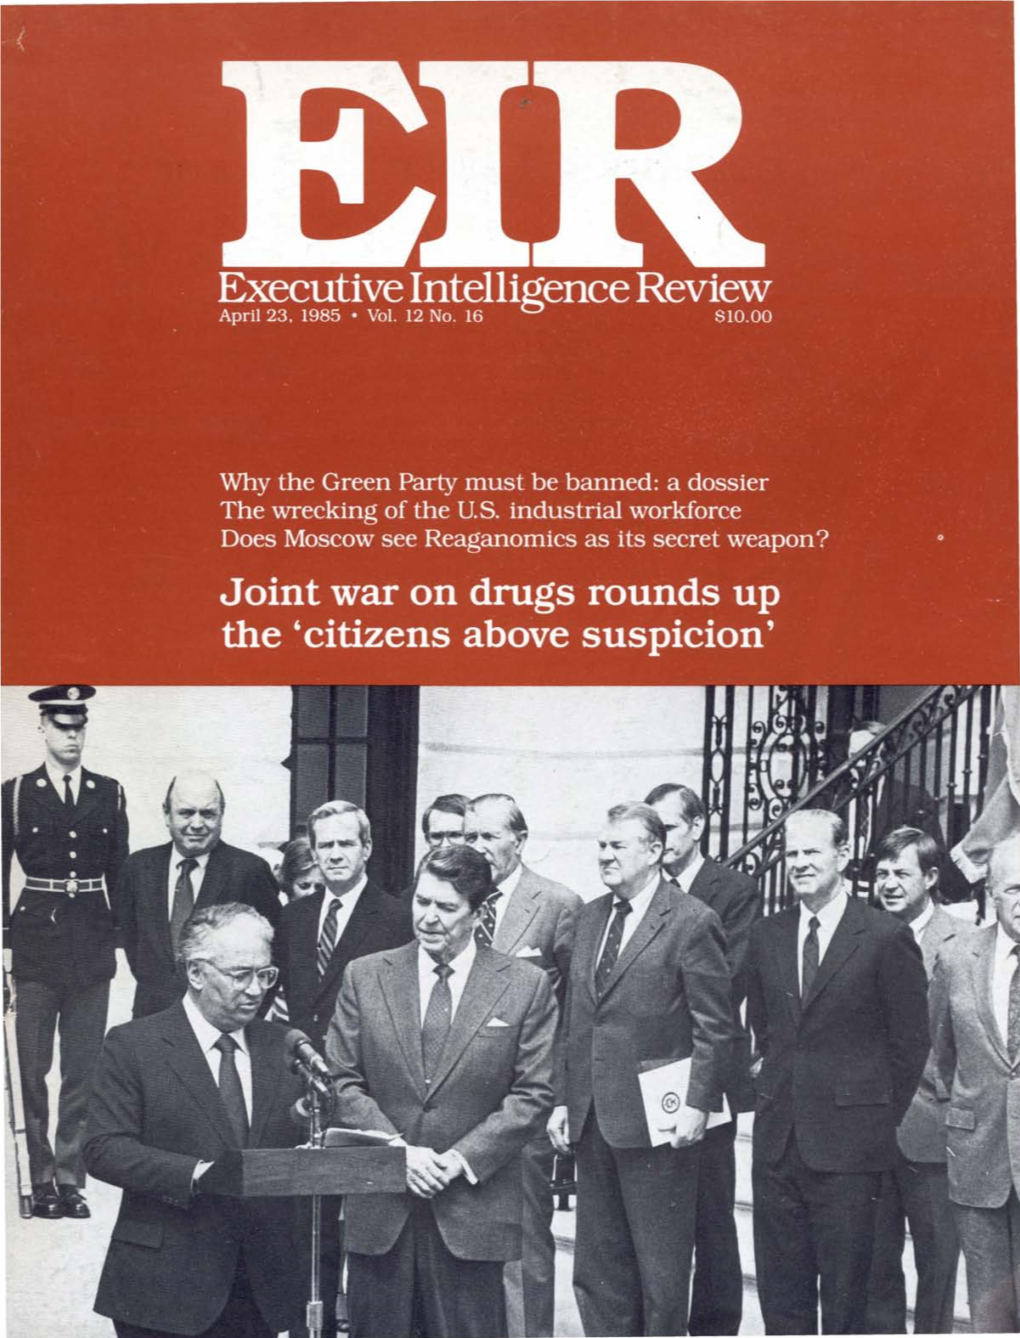 Executive Intelligence Review, Volume 12, Number 16, April 23, 1985